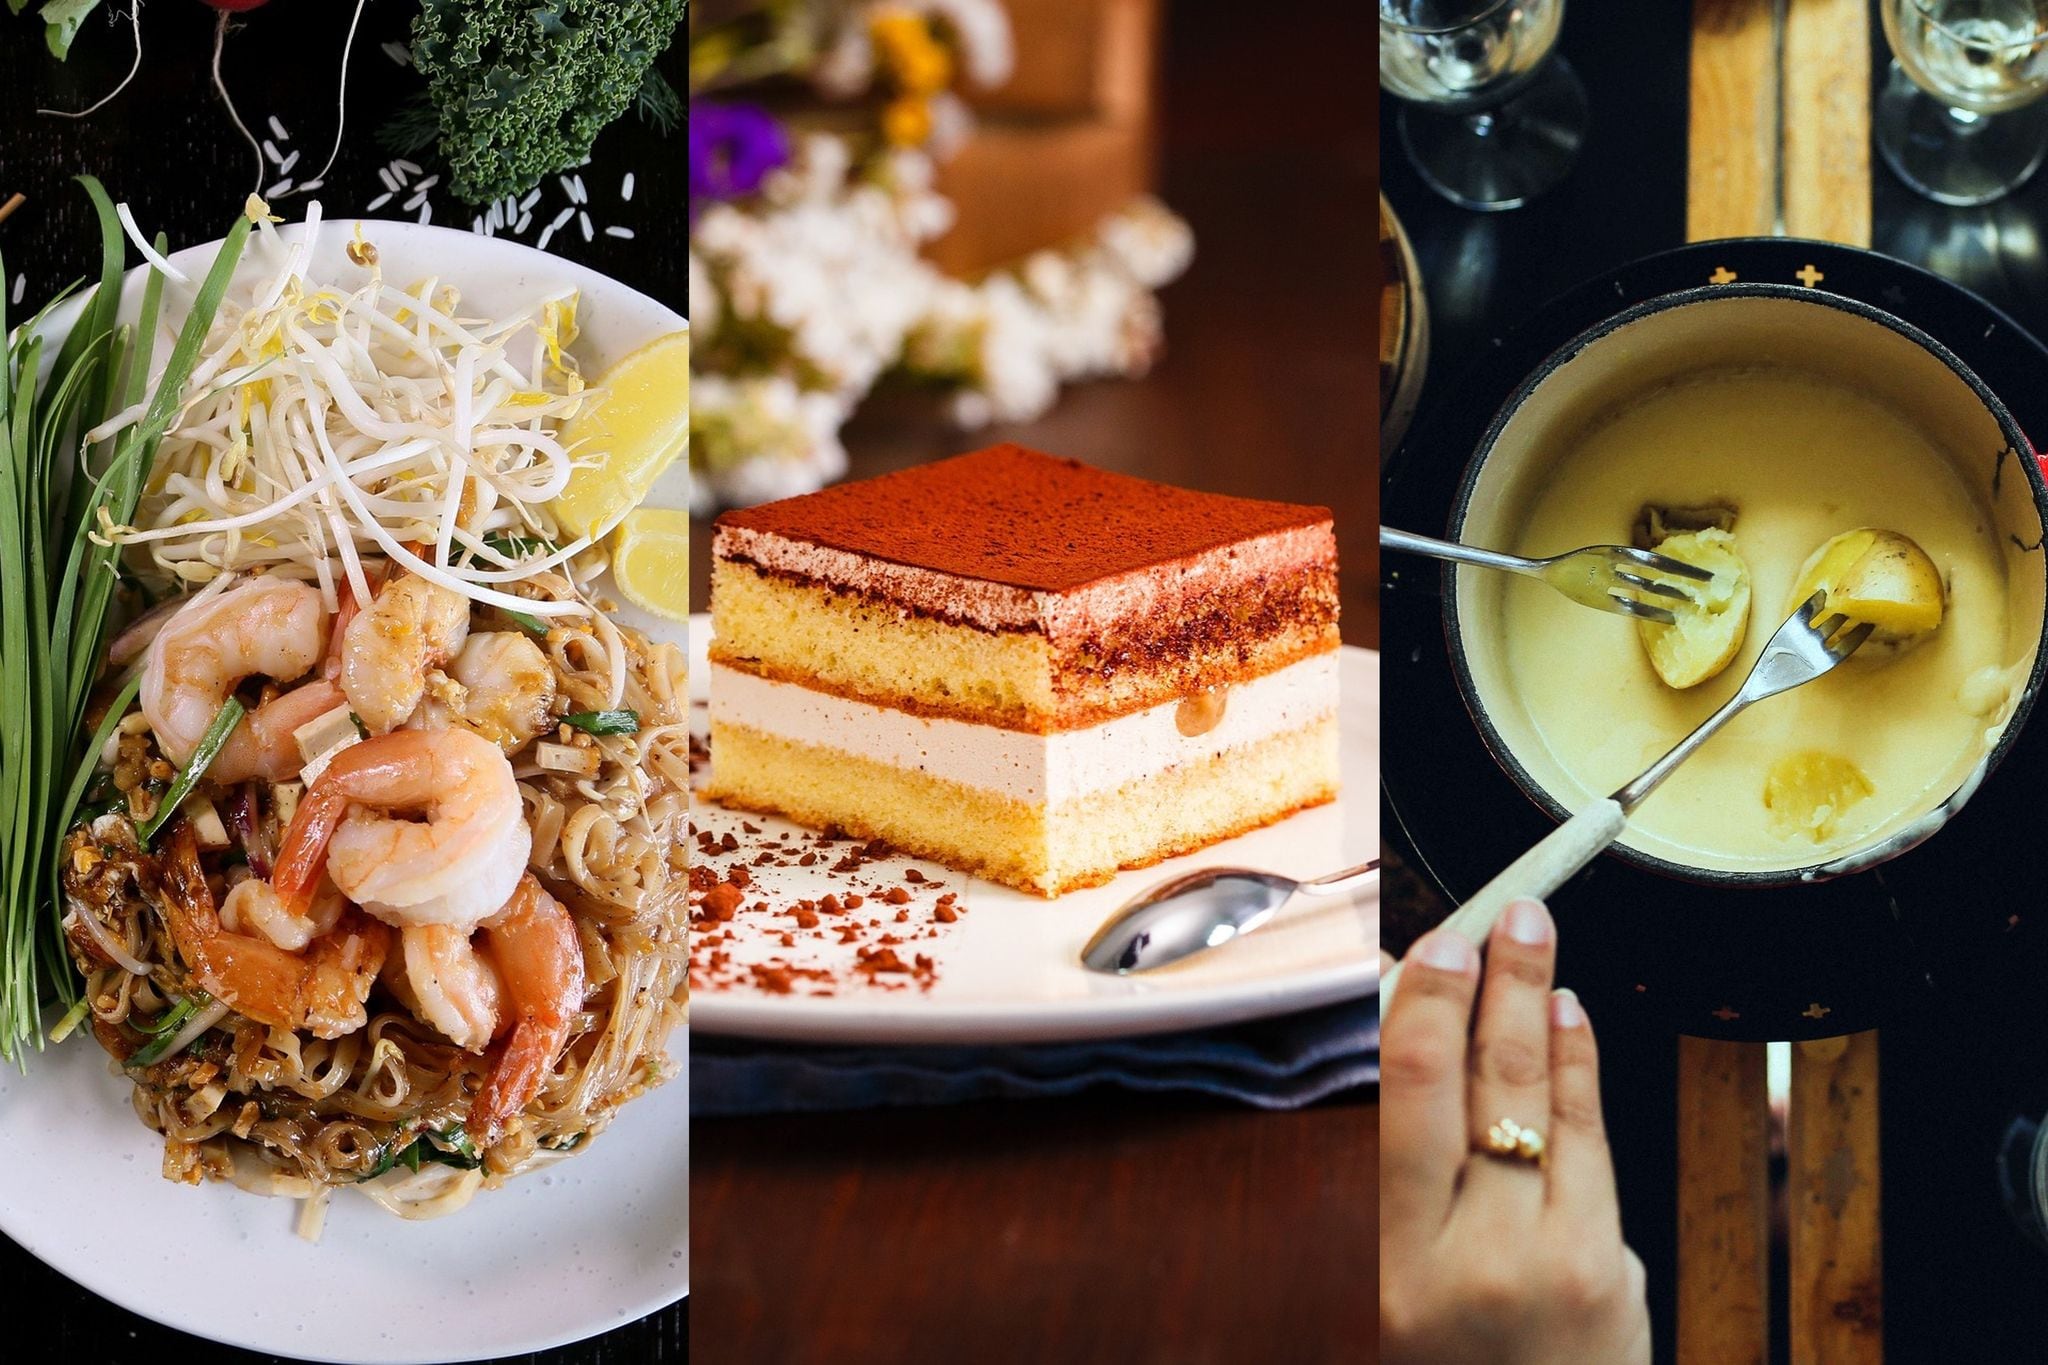 How well do you know international cuisines? Take this quiz!